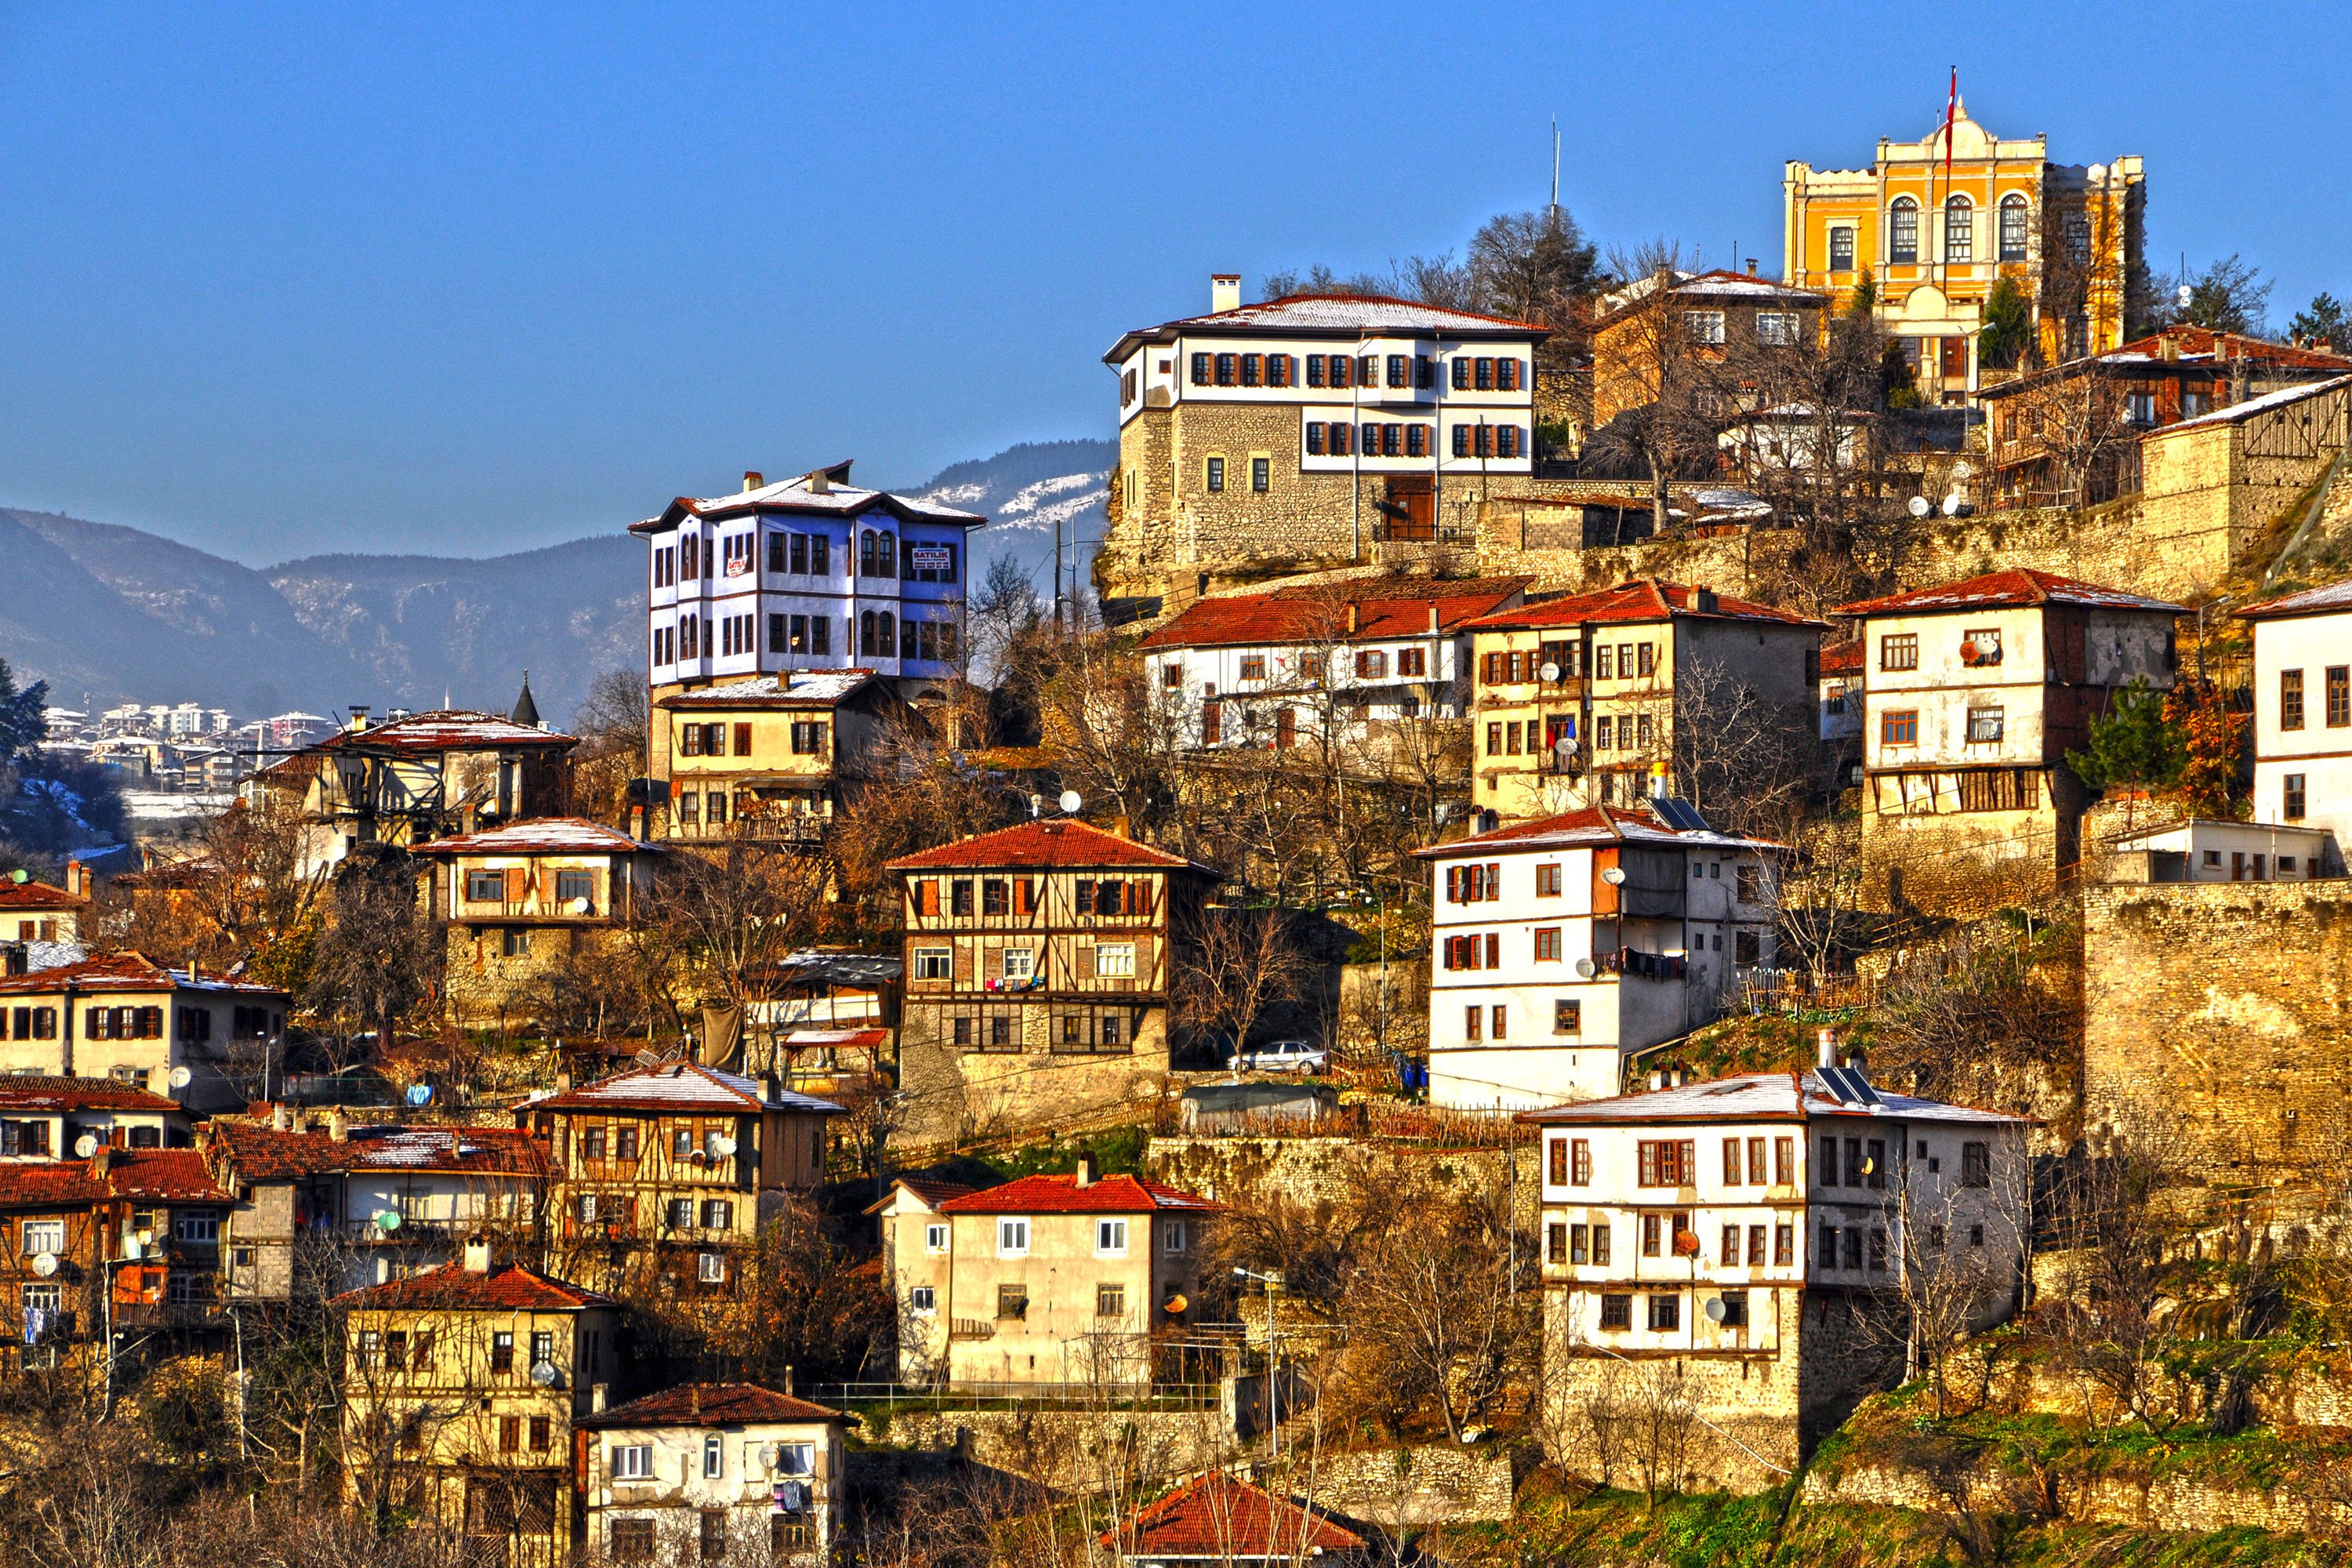 There are about 2,000 traditional houses in Safranbolu. (Shutterstock Photo)